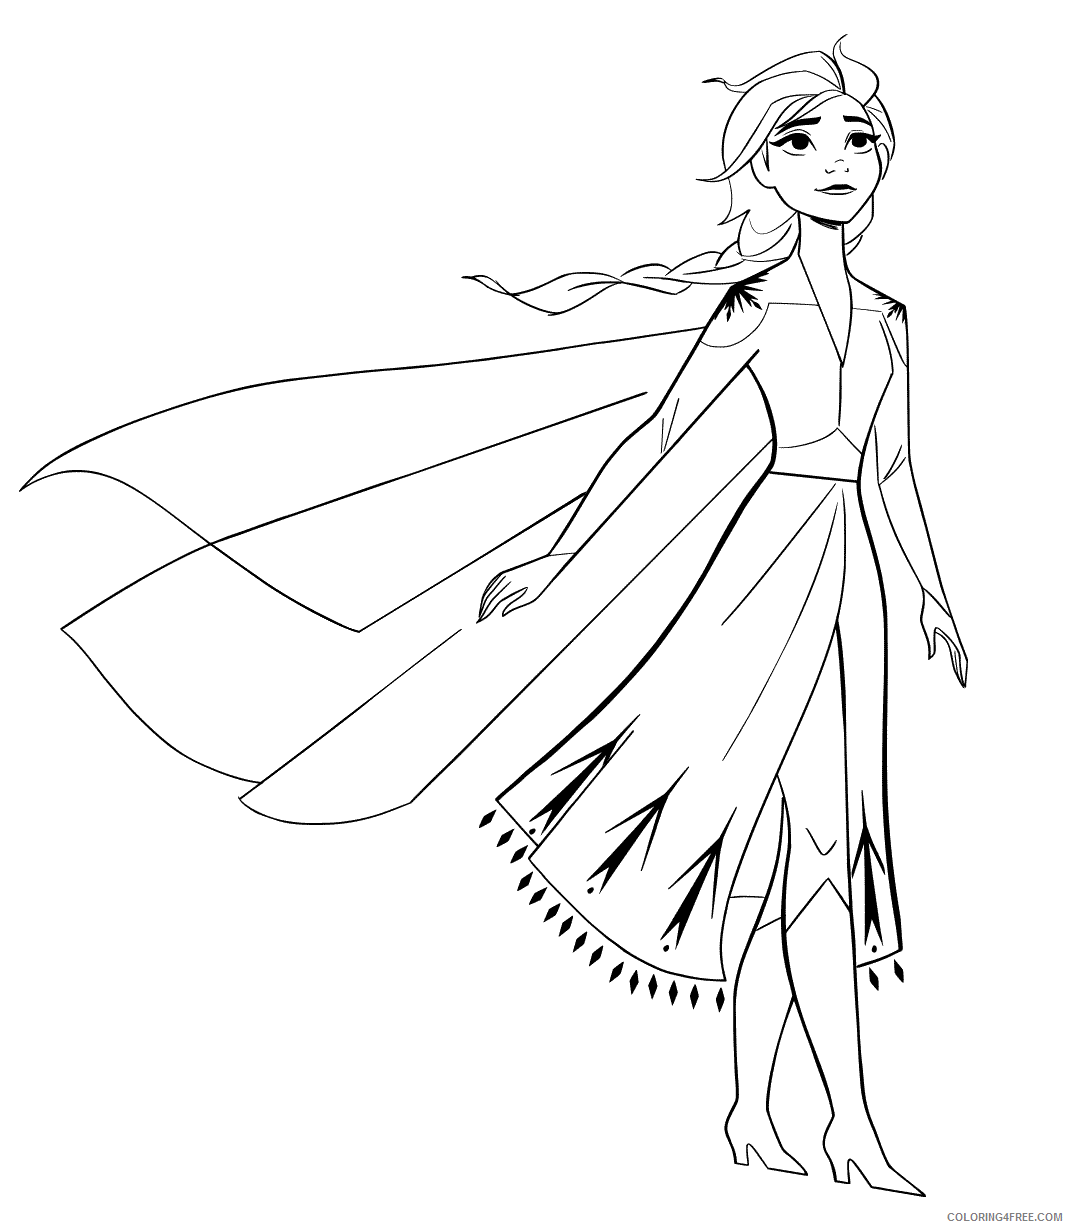 Ana Frozen 2 Coloring Pages Printable Sheets Elsaom Newozen To Color Coloring 2021 a 5680 Coloring4free